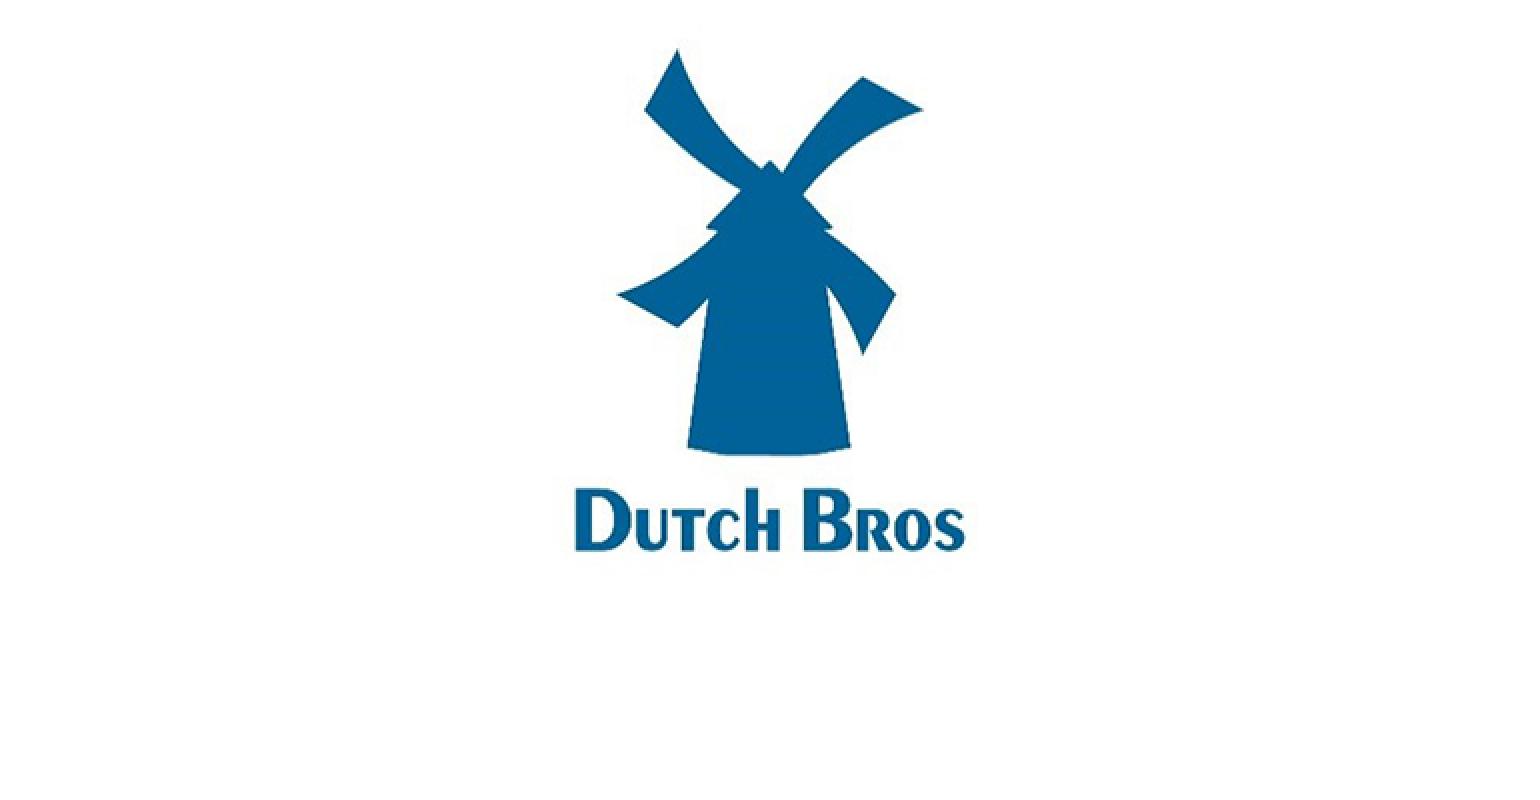 Dutch Bros Coffee drives revenue growth with record store openings